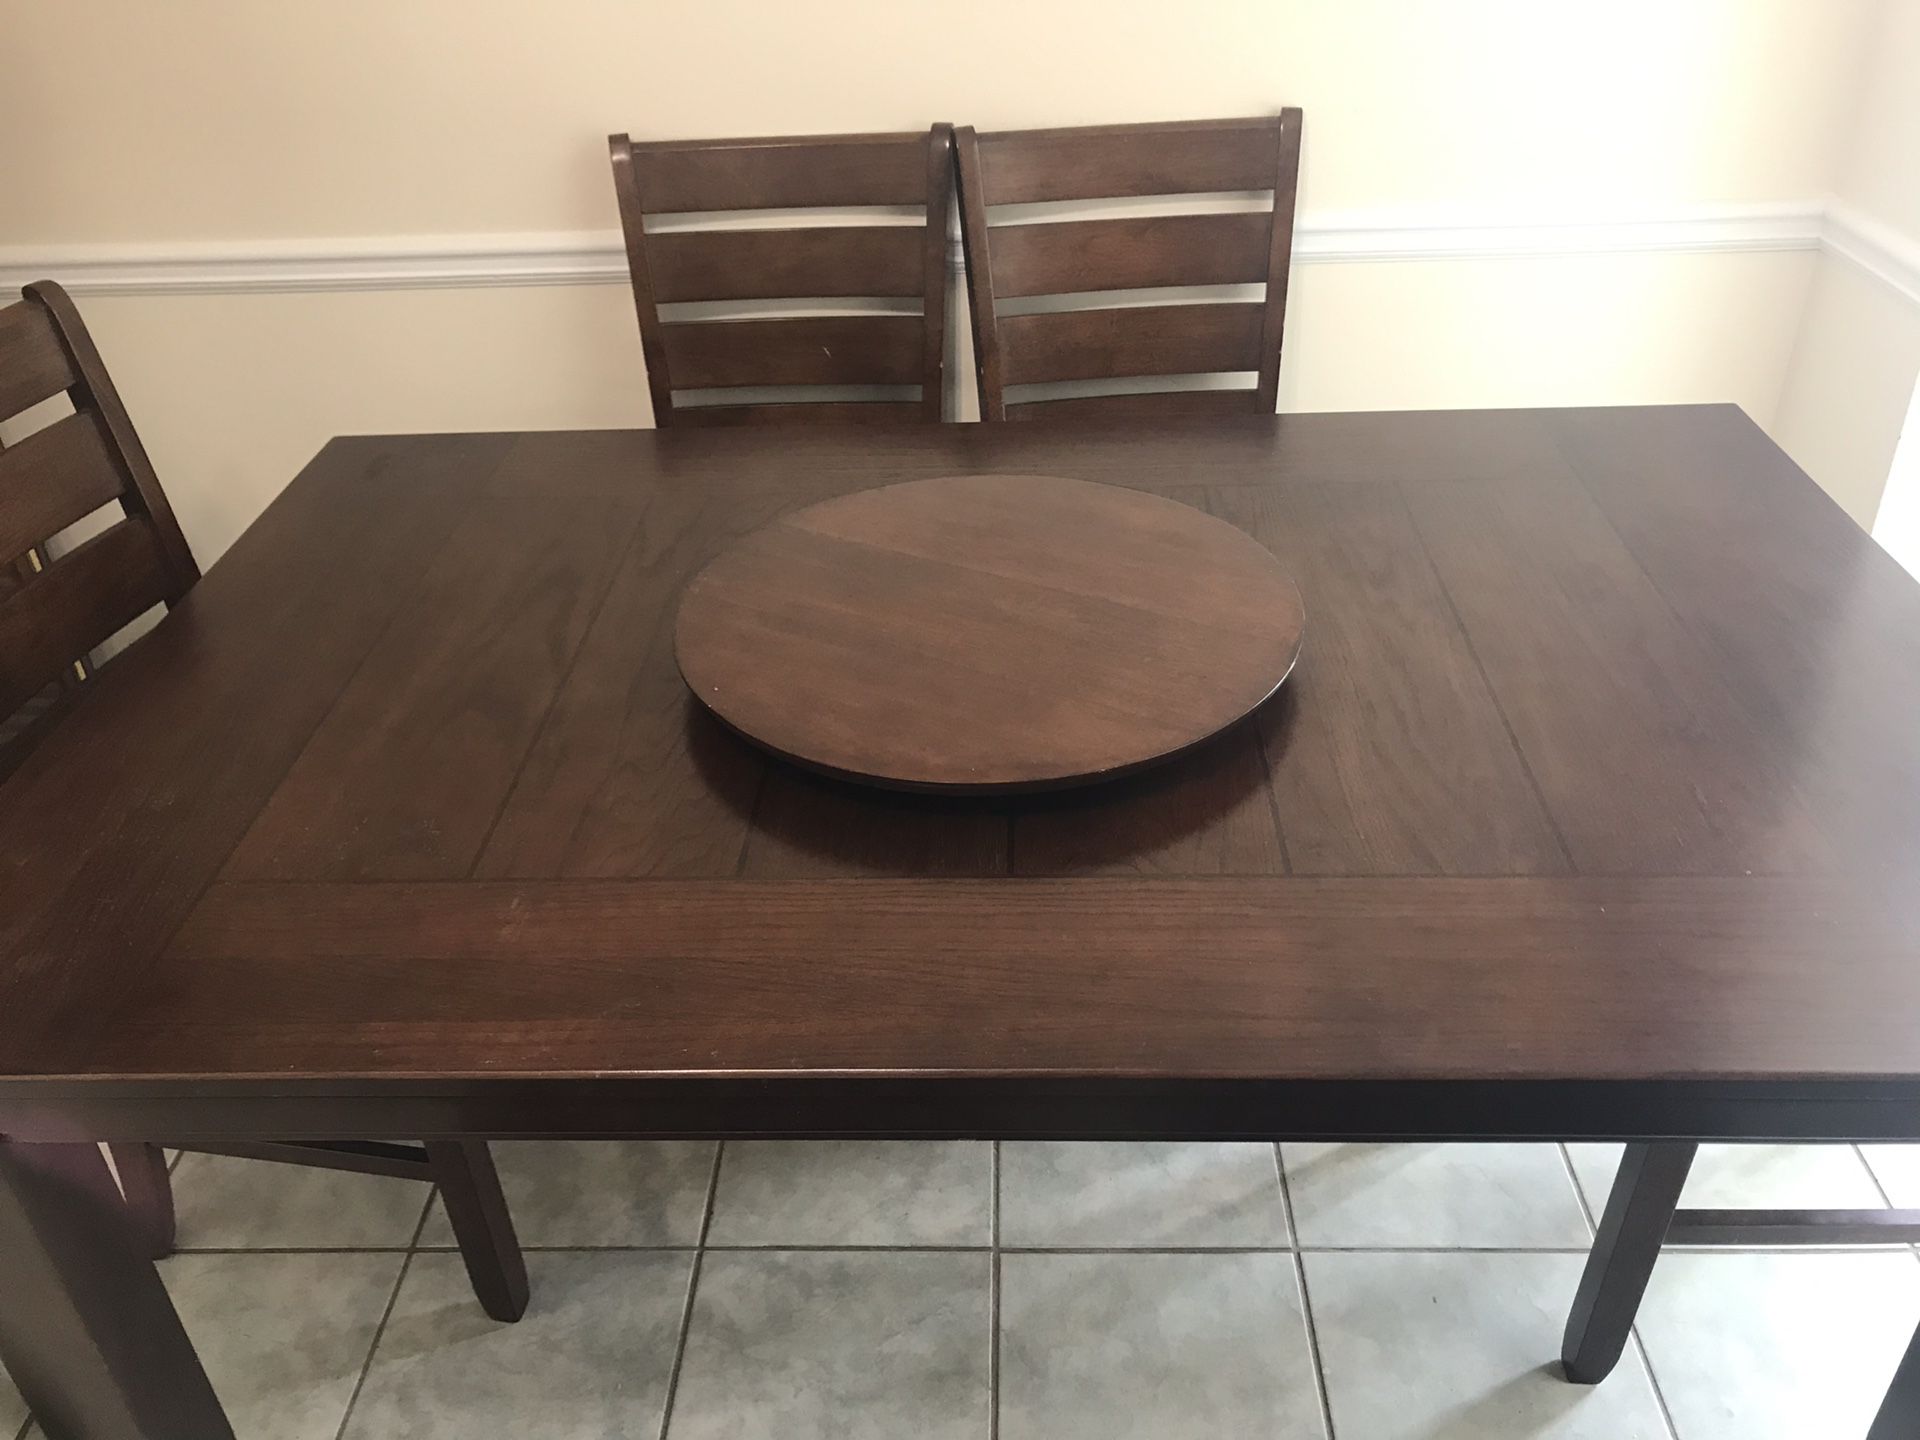 Wooden 6 Chair Dining Room Table with Lazy Susan